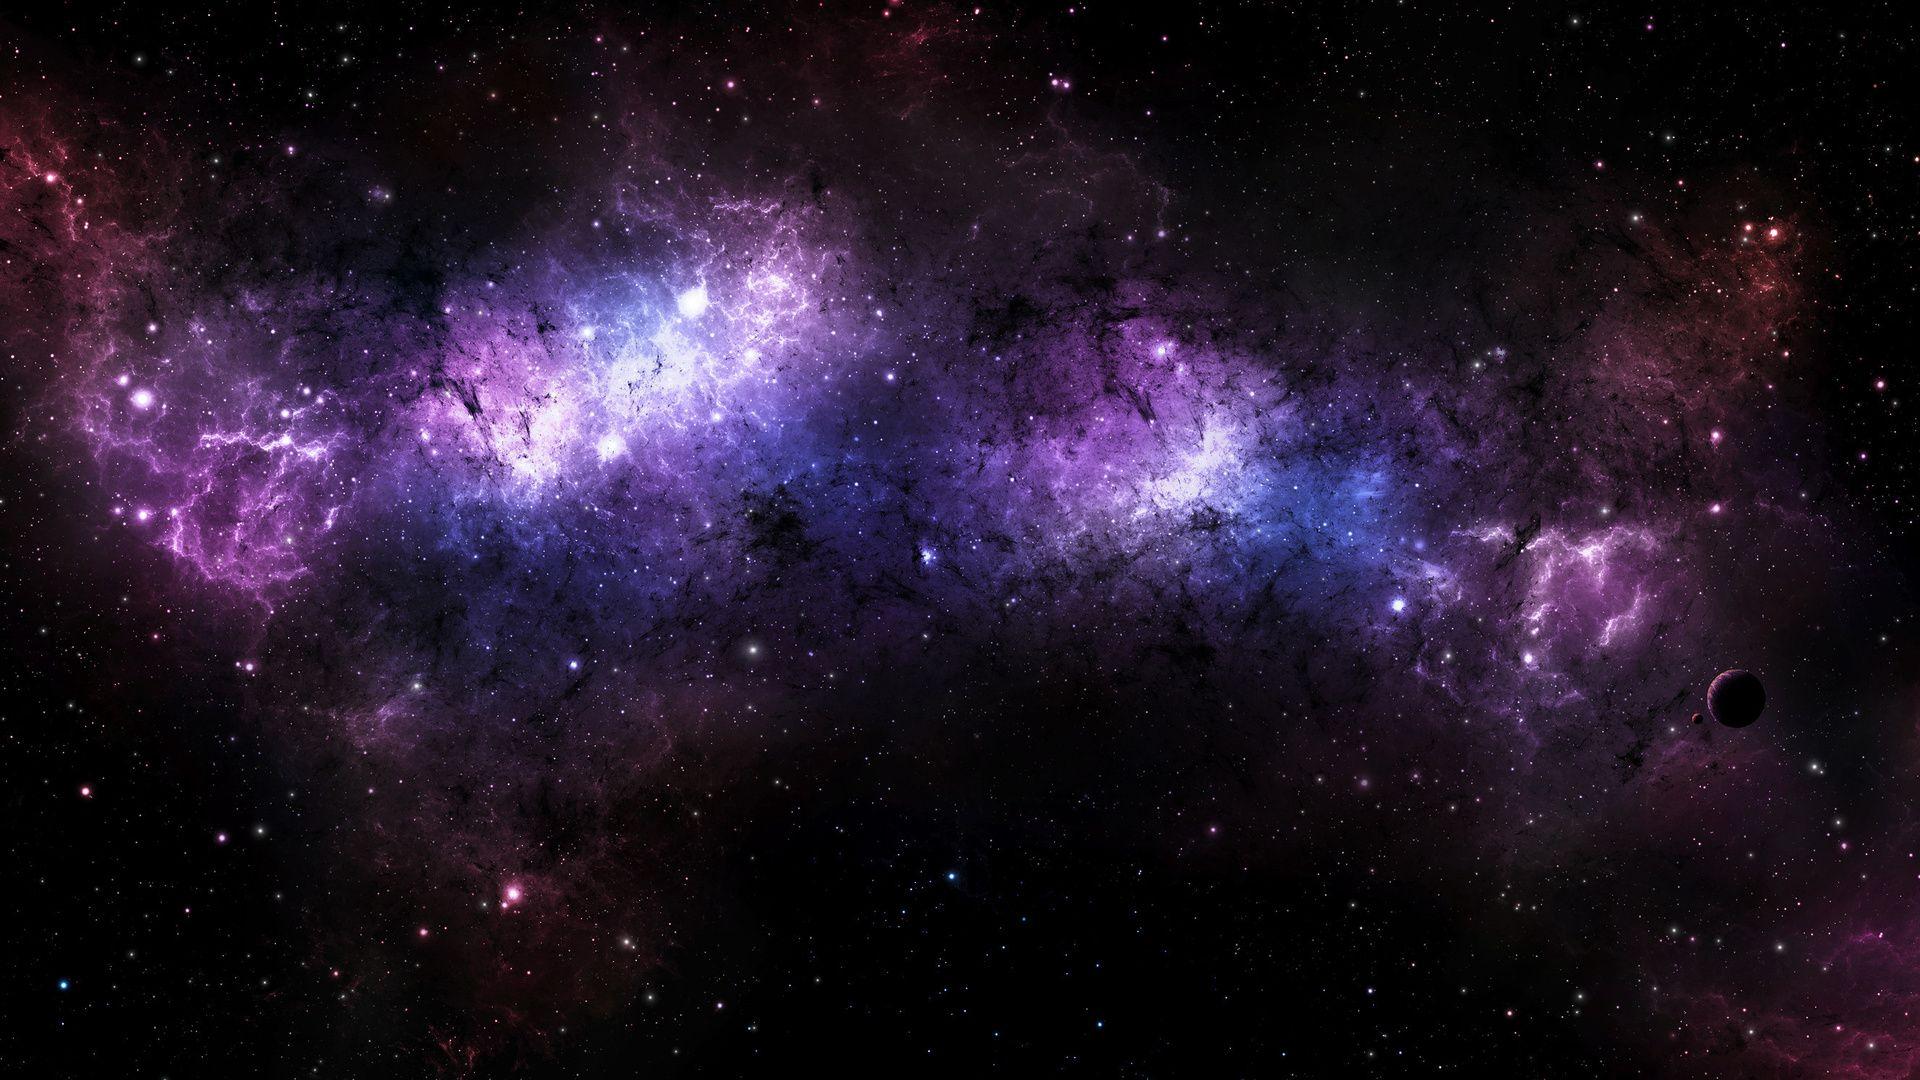 free space background